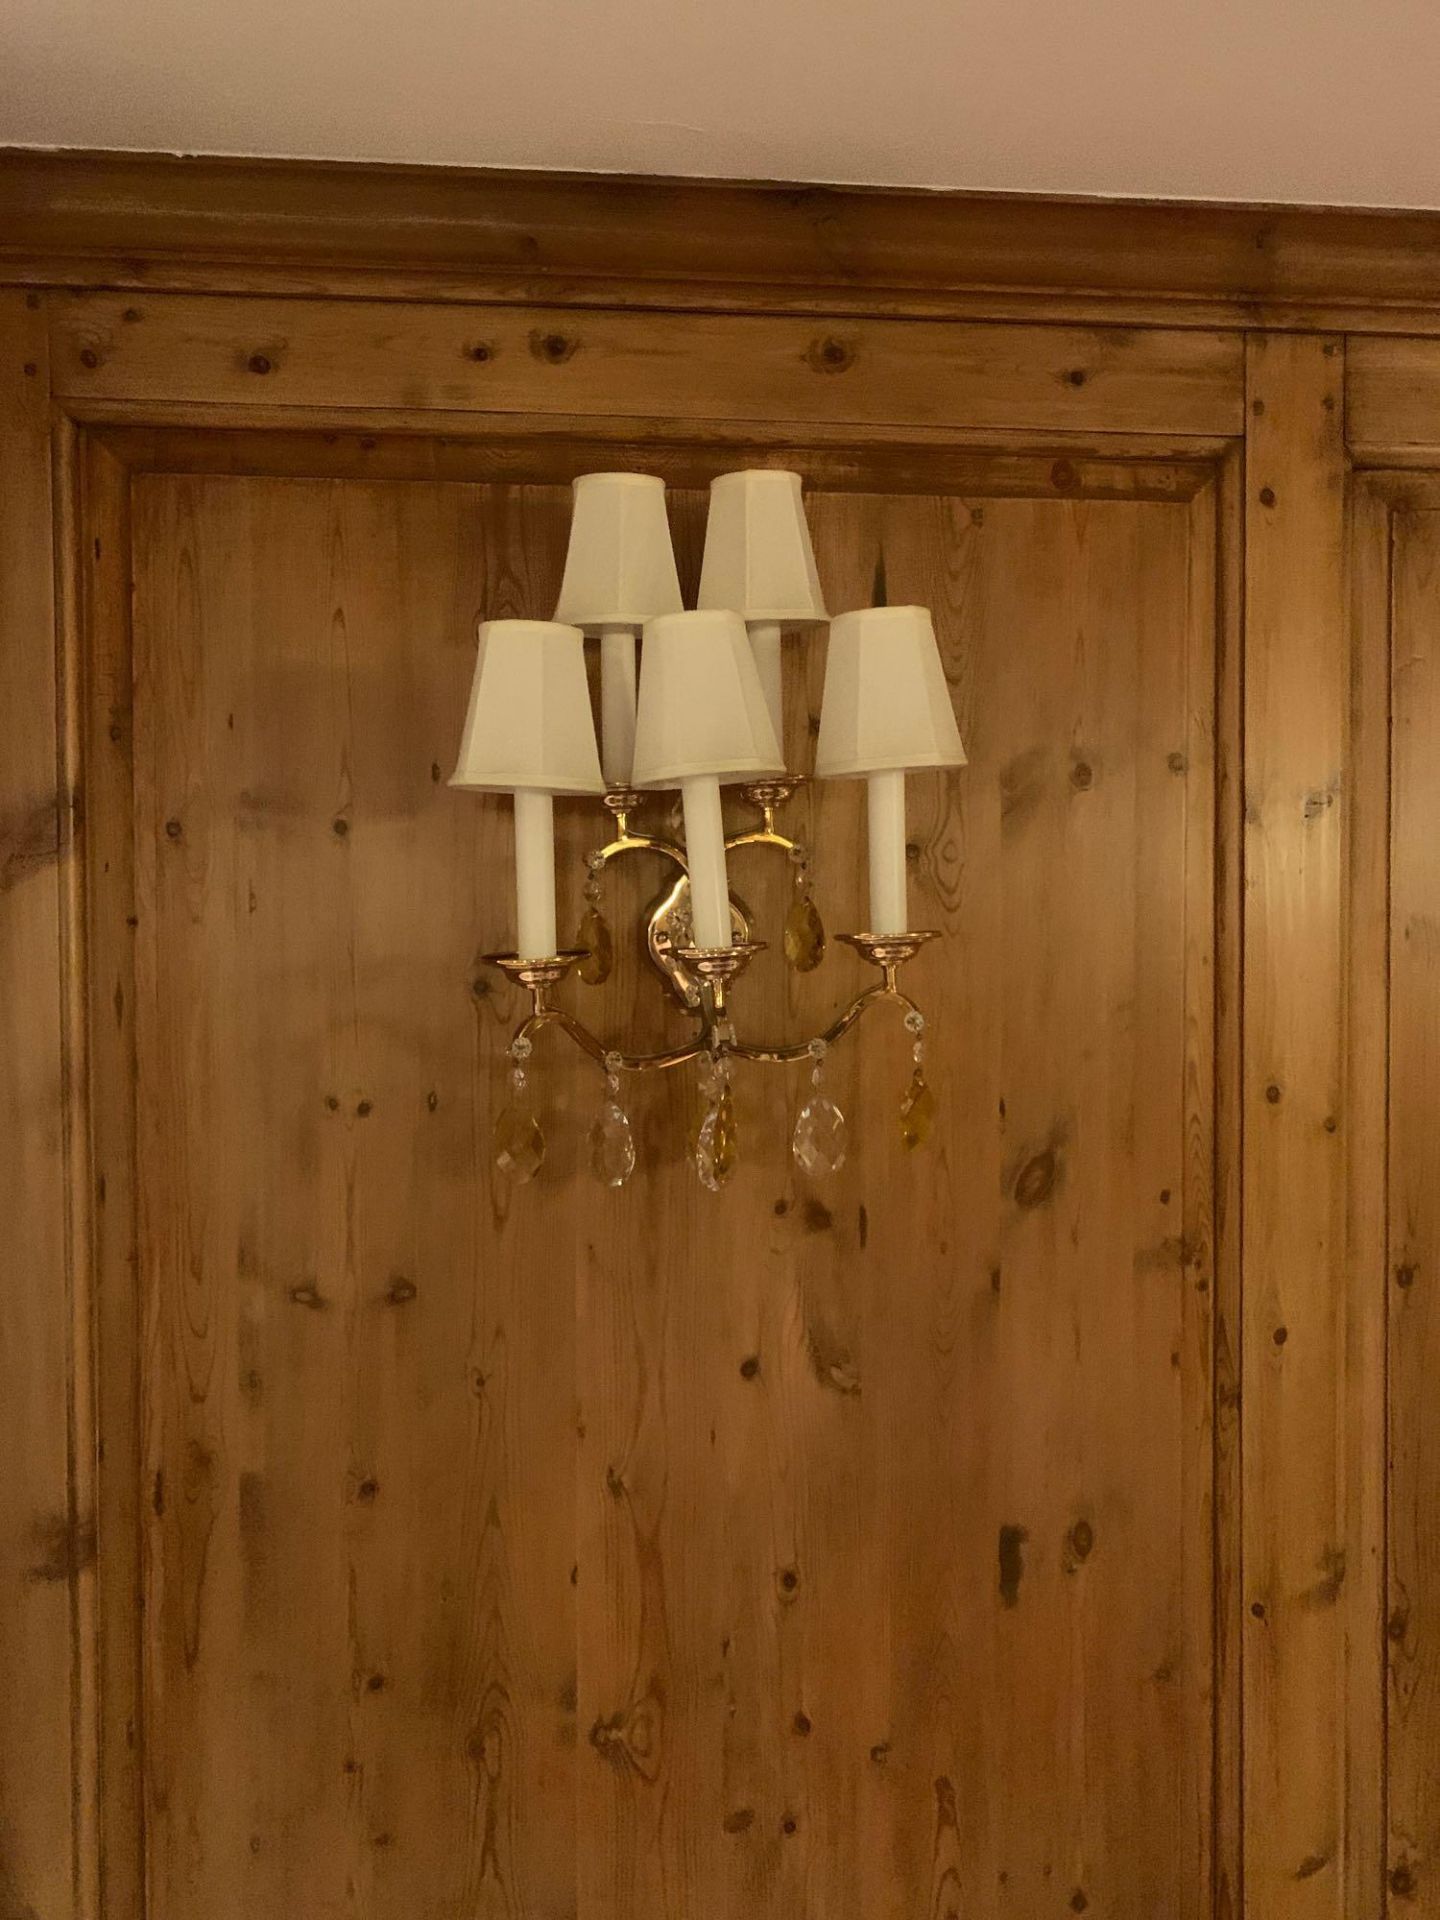 A Pair Of Five Arm Brass Wall Sconce With Linen Shades Droplets Amber And Clear Crystal Glass. 35x